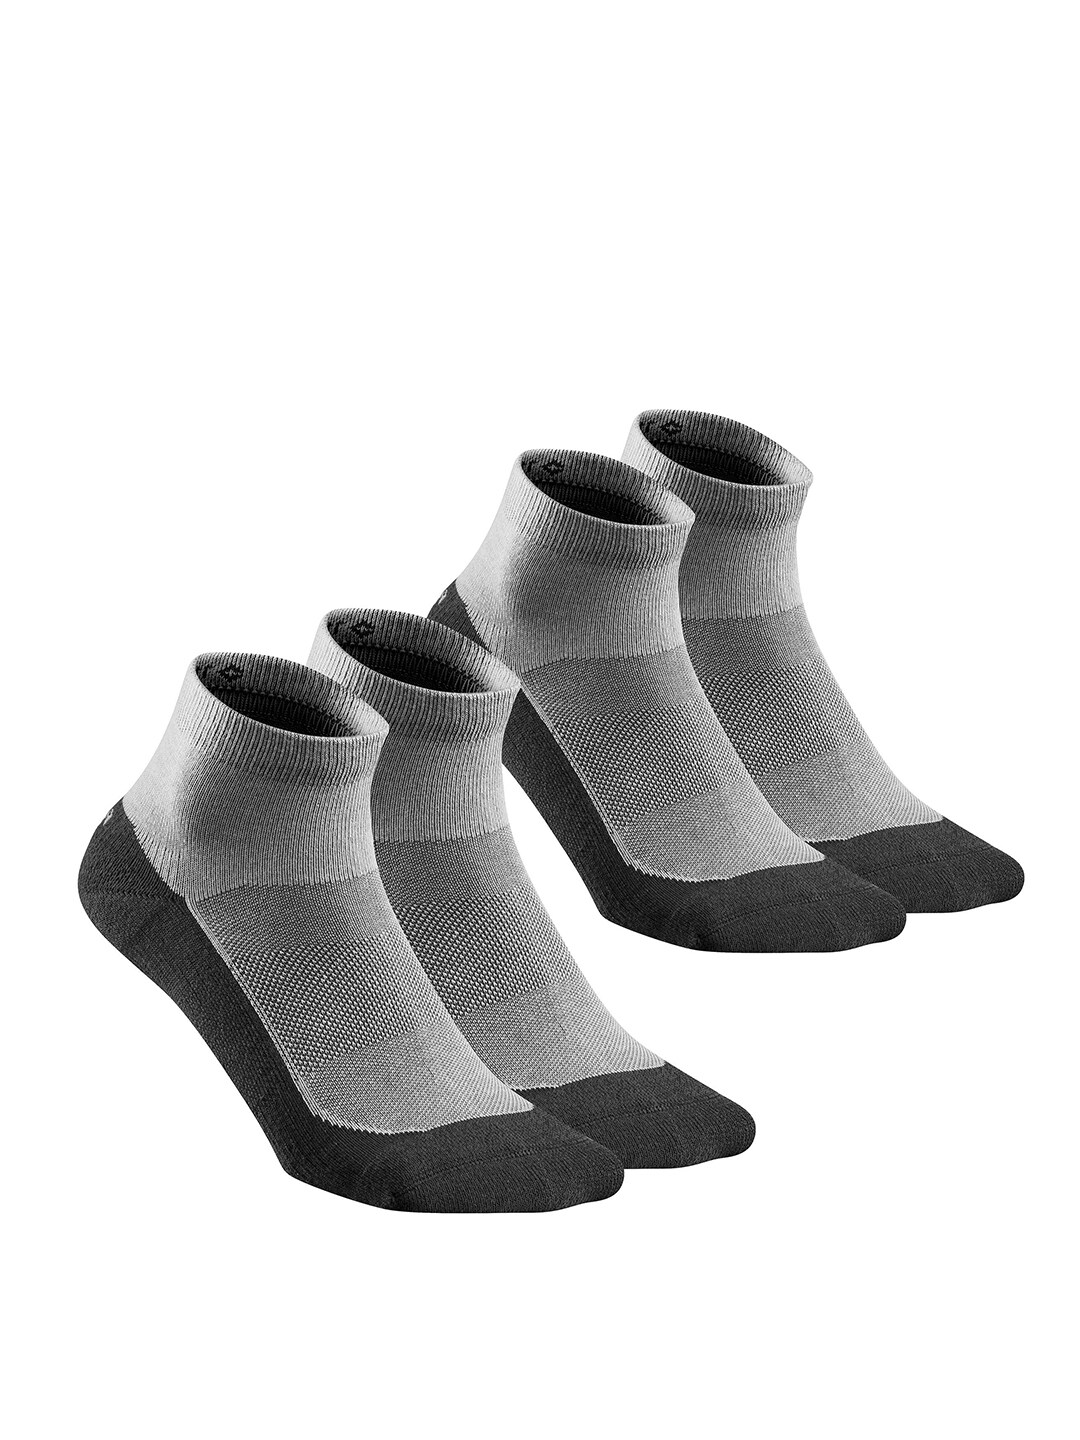 Quechua By Decathlon Unisex Pack of 2 Grey Colorblocked Ankle Length Socks Price in India